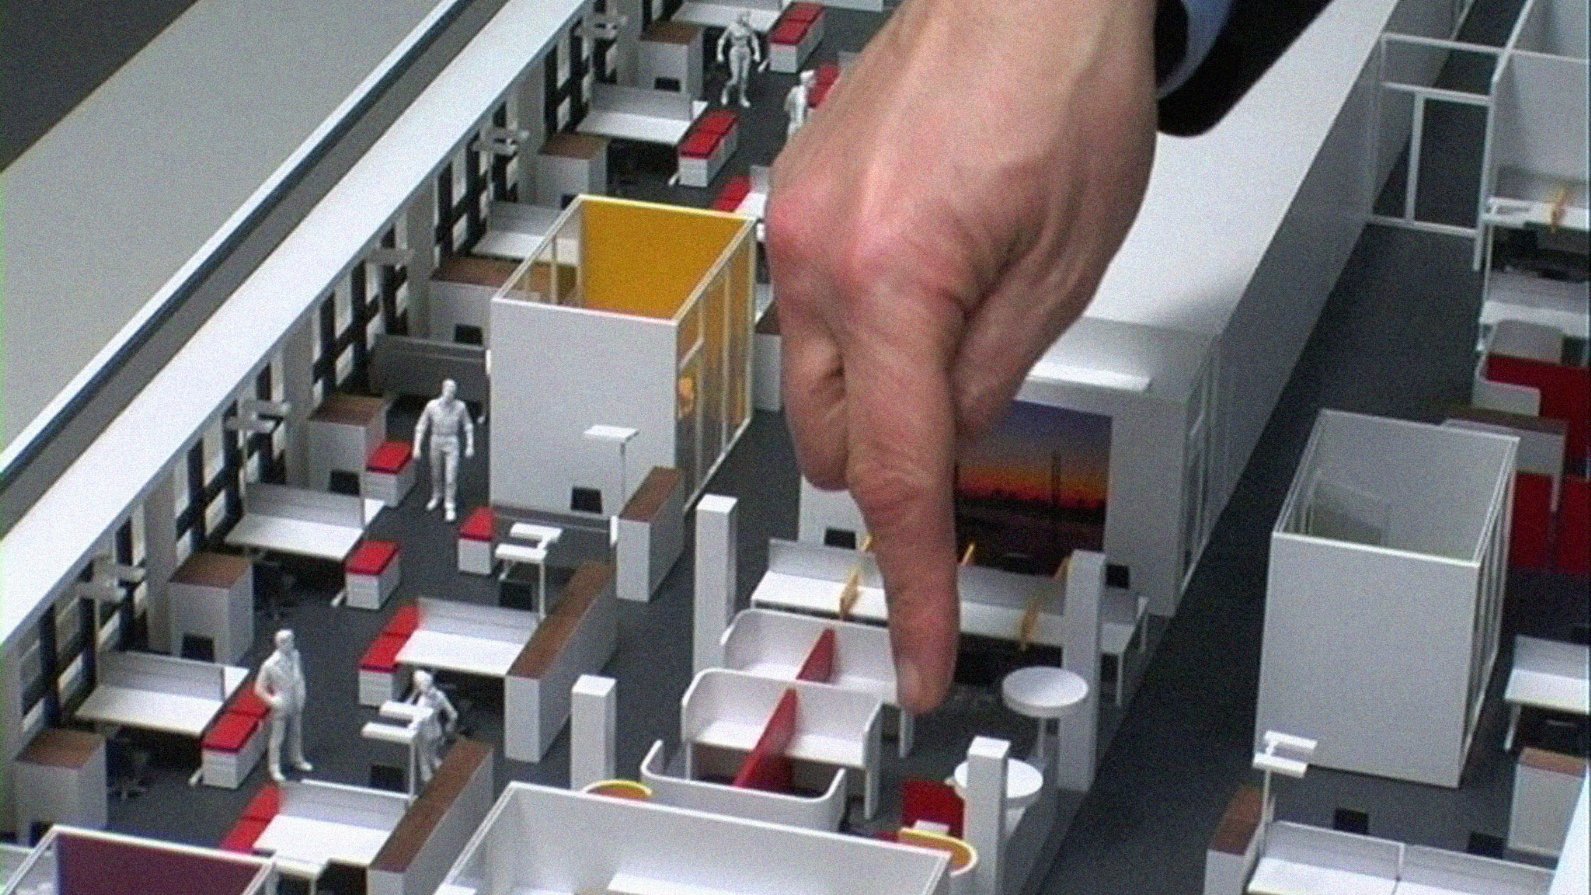 Film still from "A New Product" by Harun Farocki, a hand points to a small element in the interior view of a 3D miniature office model.